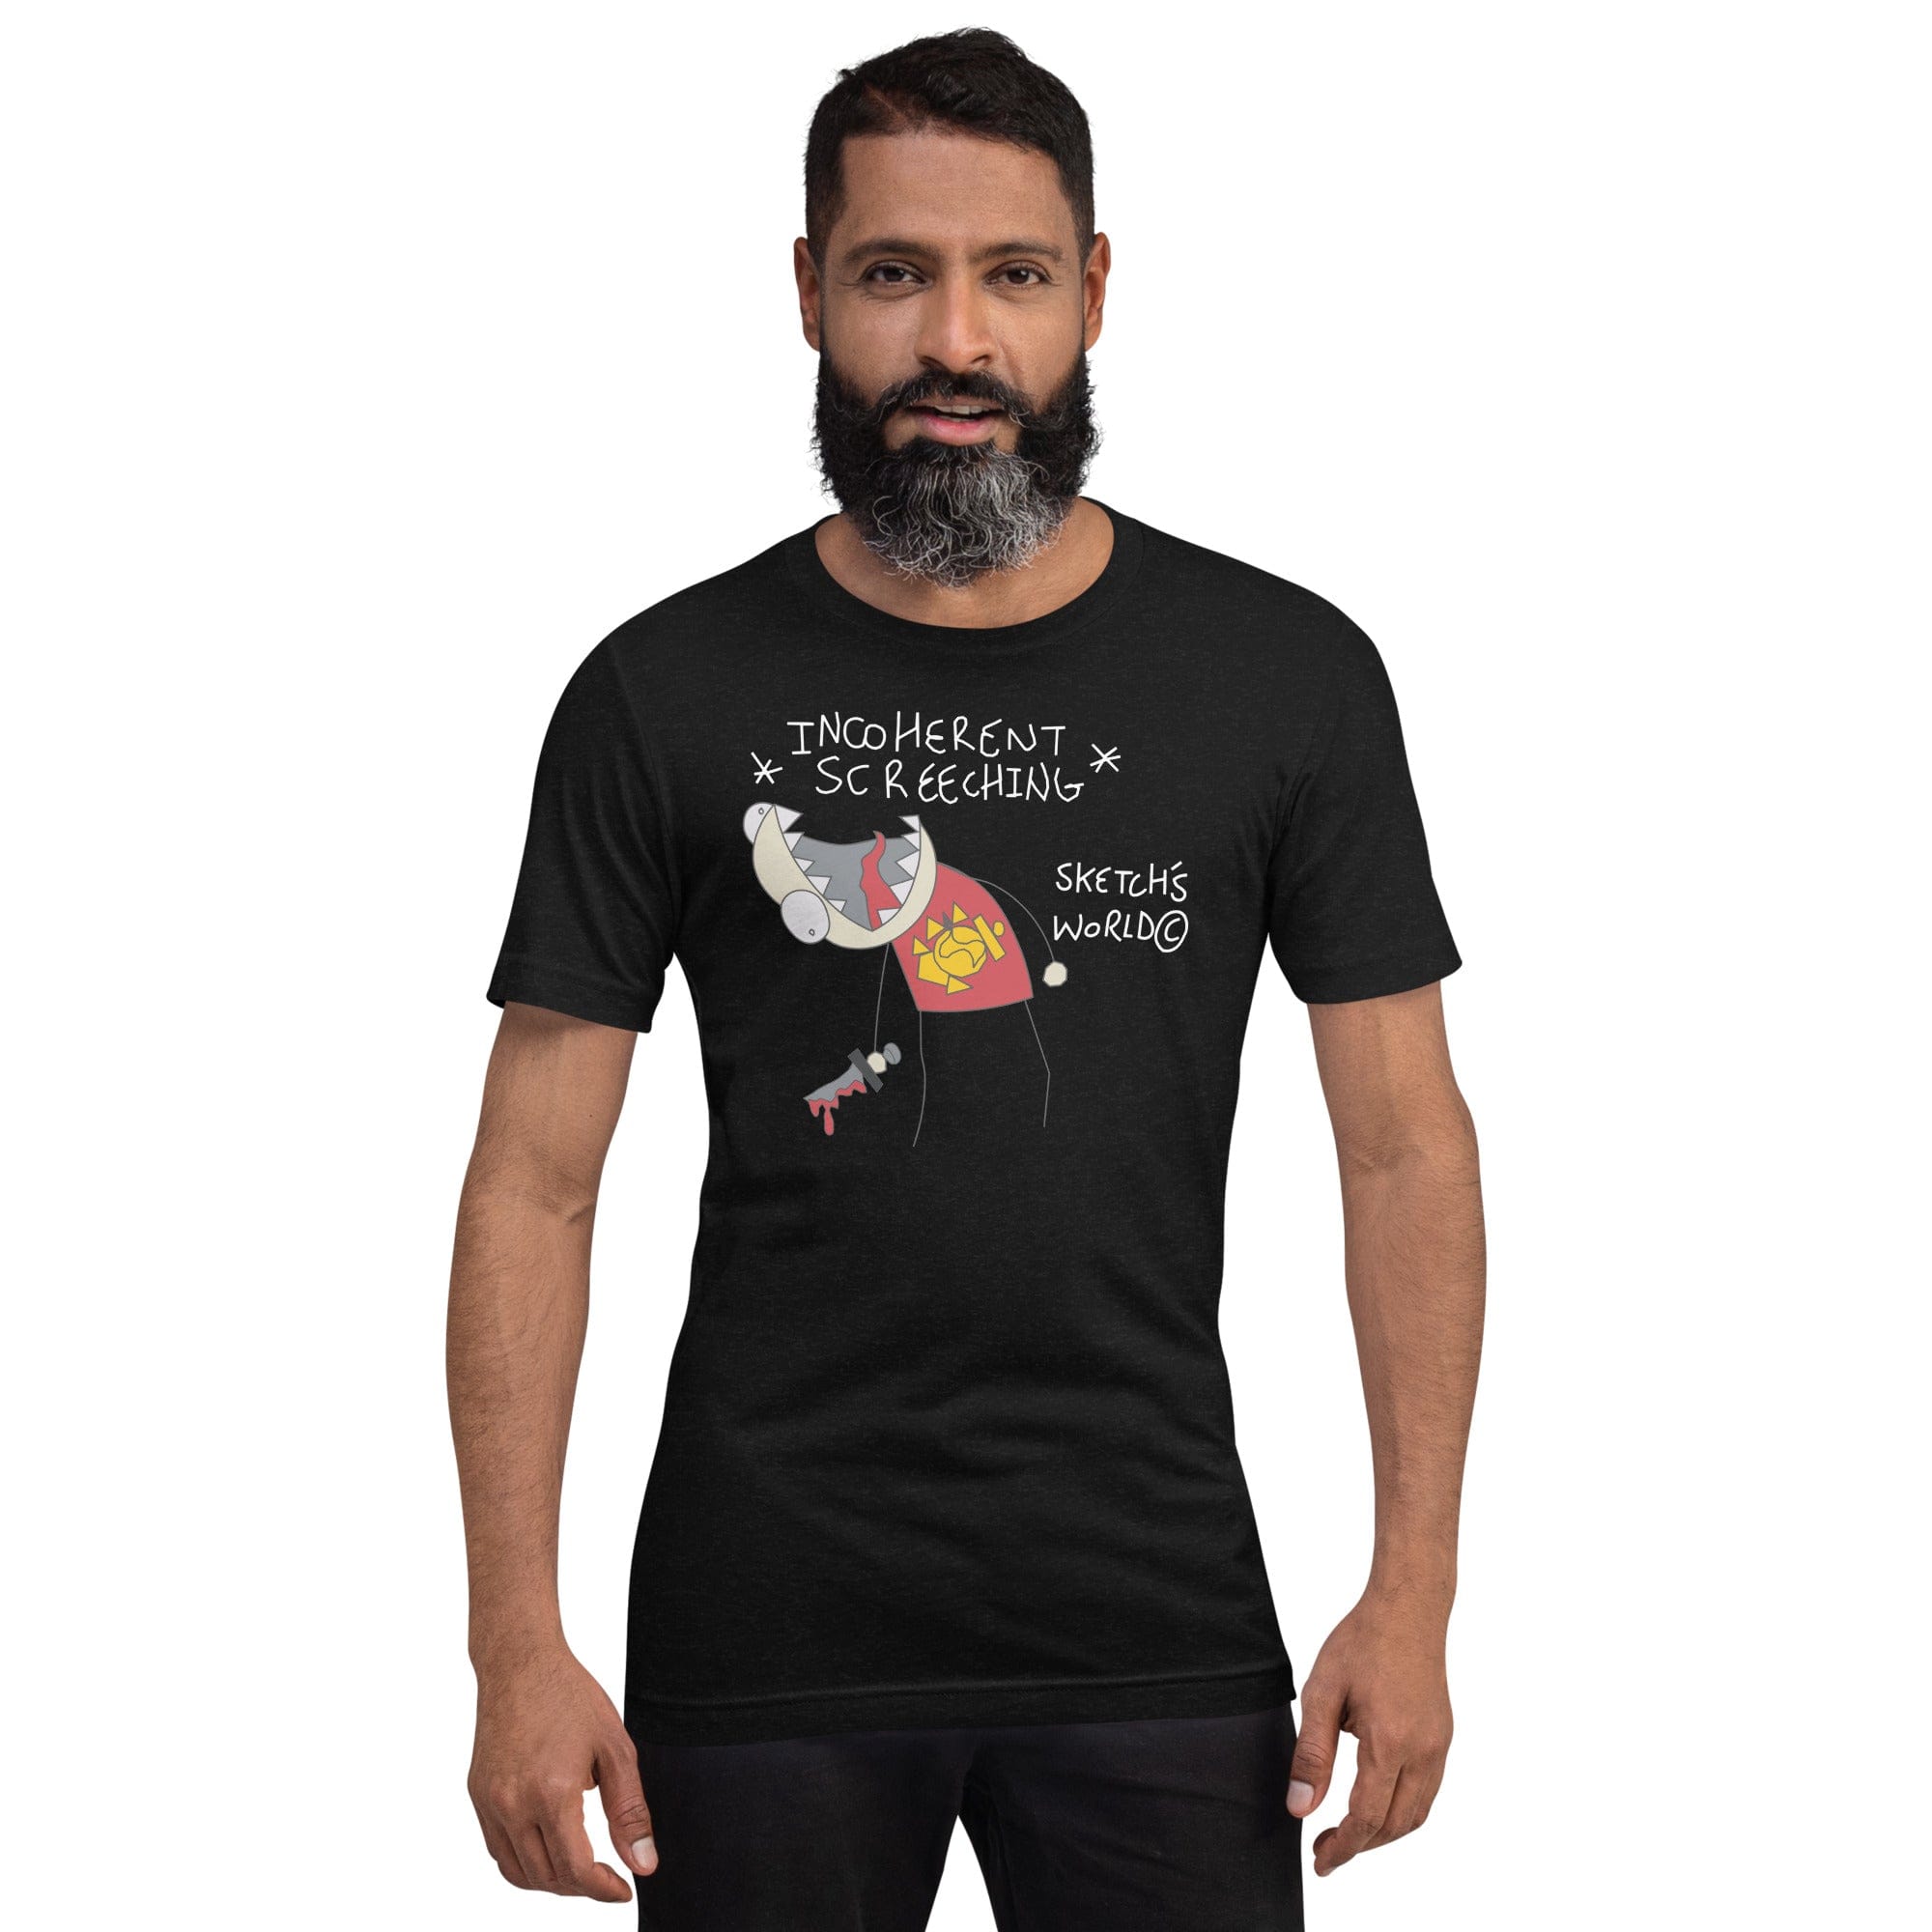 Tactical Gear Junkie Black Heather / XS Sketch's World © Officially Licensed - Incoherent Screeching Marine Unisex T-Shirt